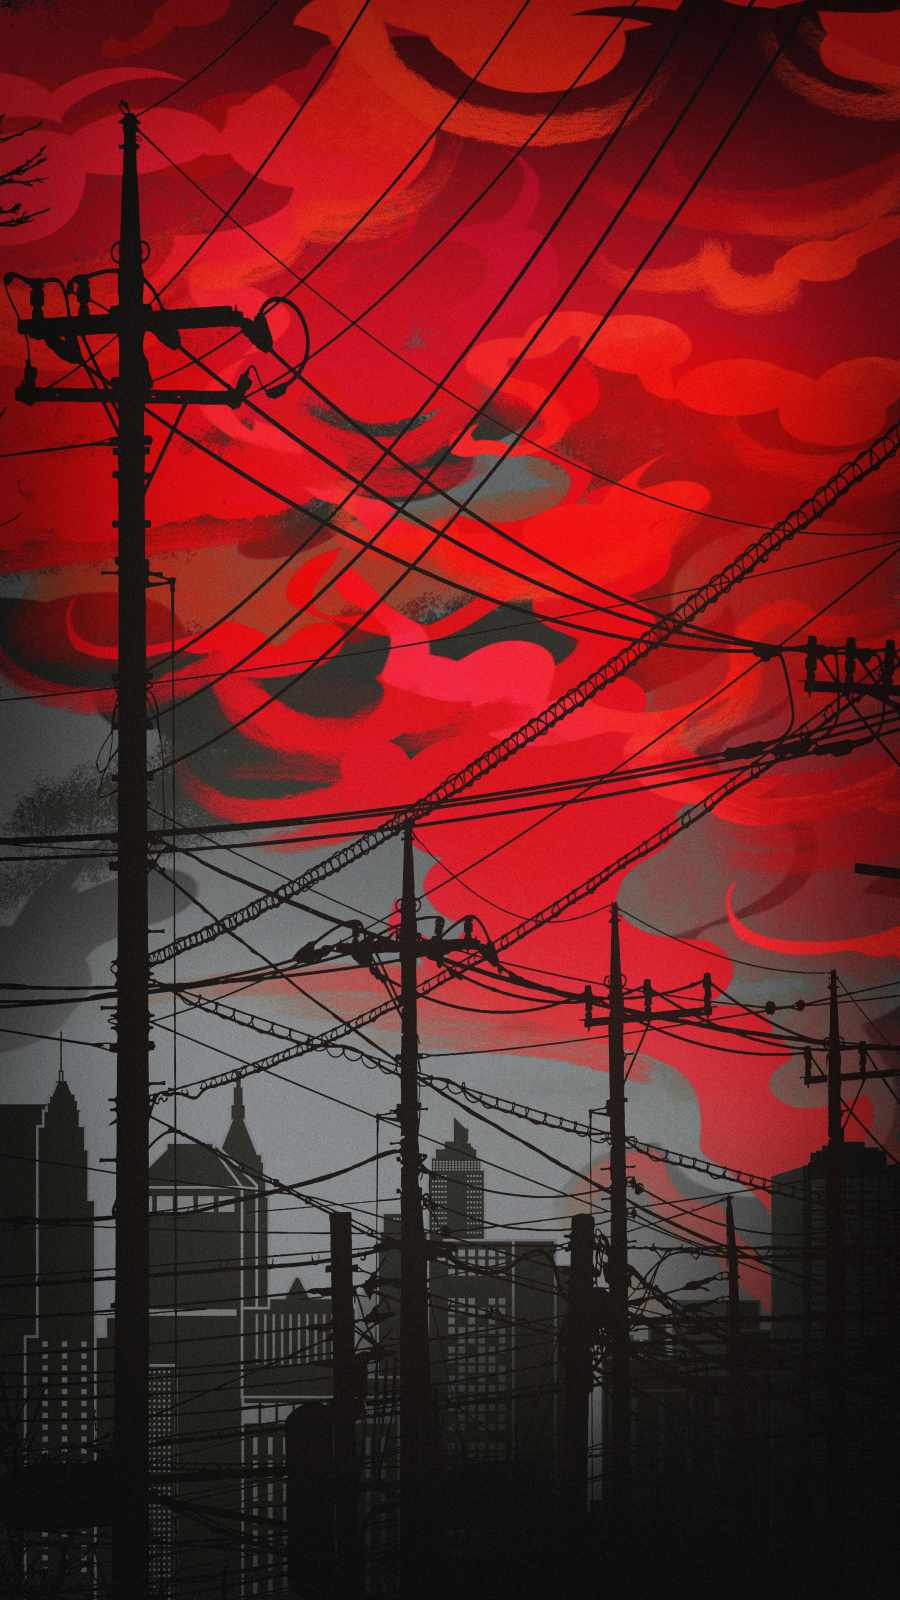 A city skyline with power lines and telephone poles - Anime city, iPhone red